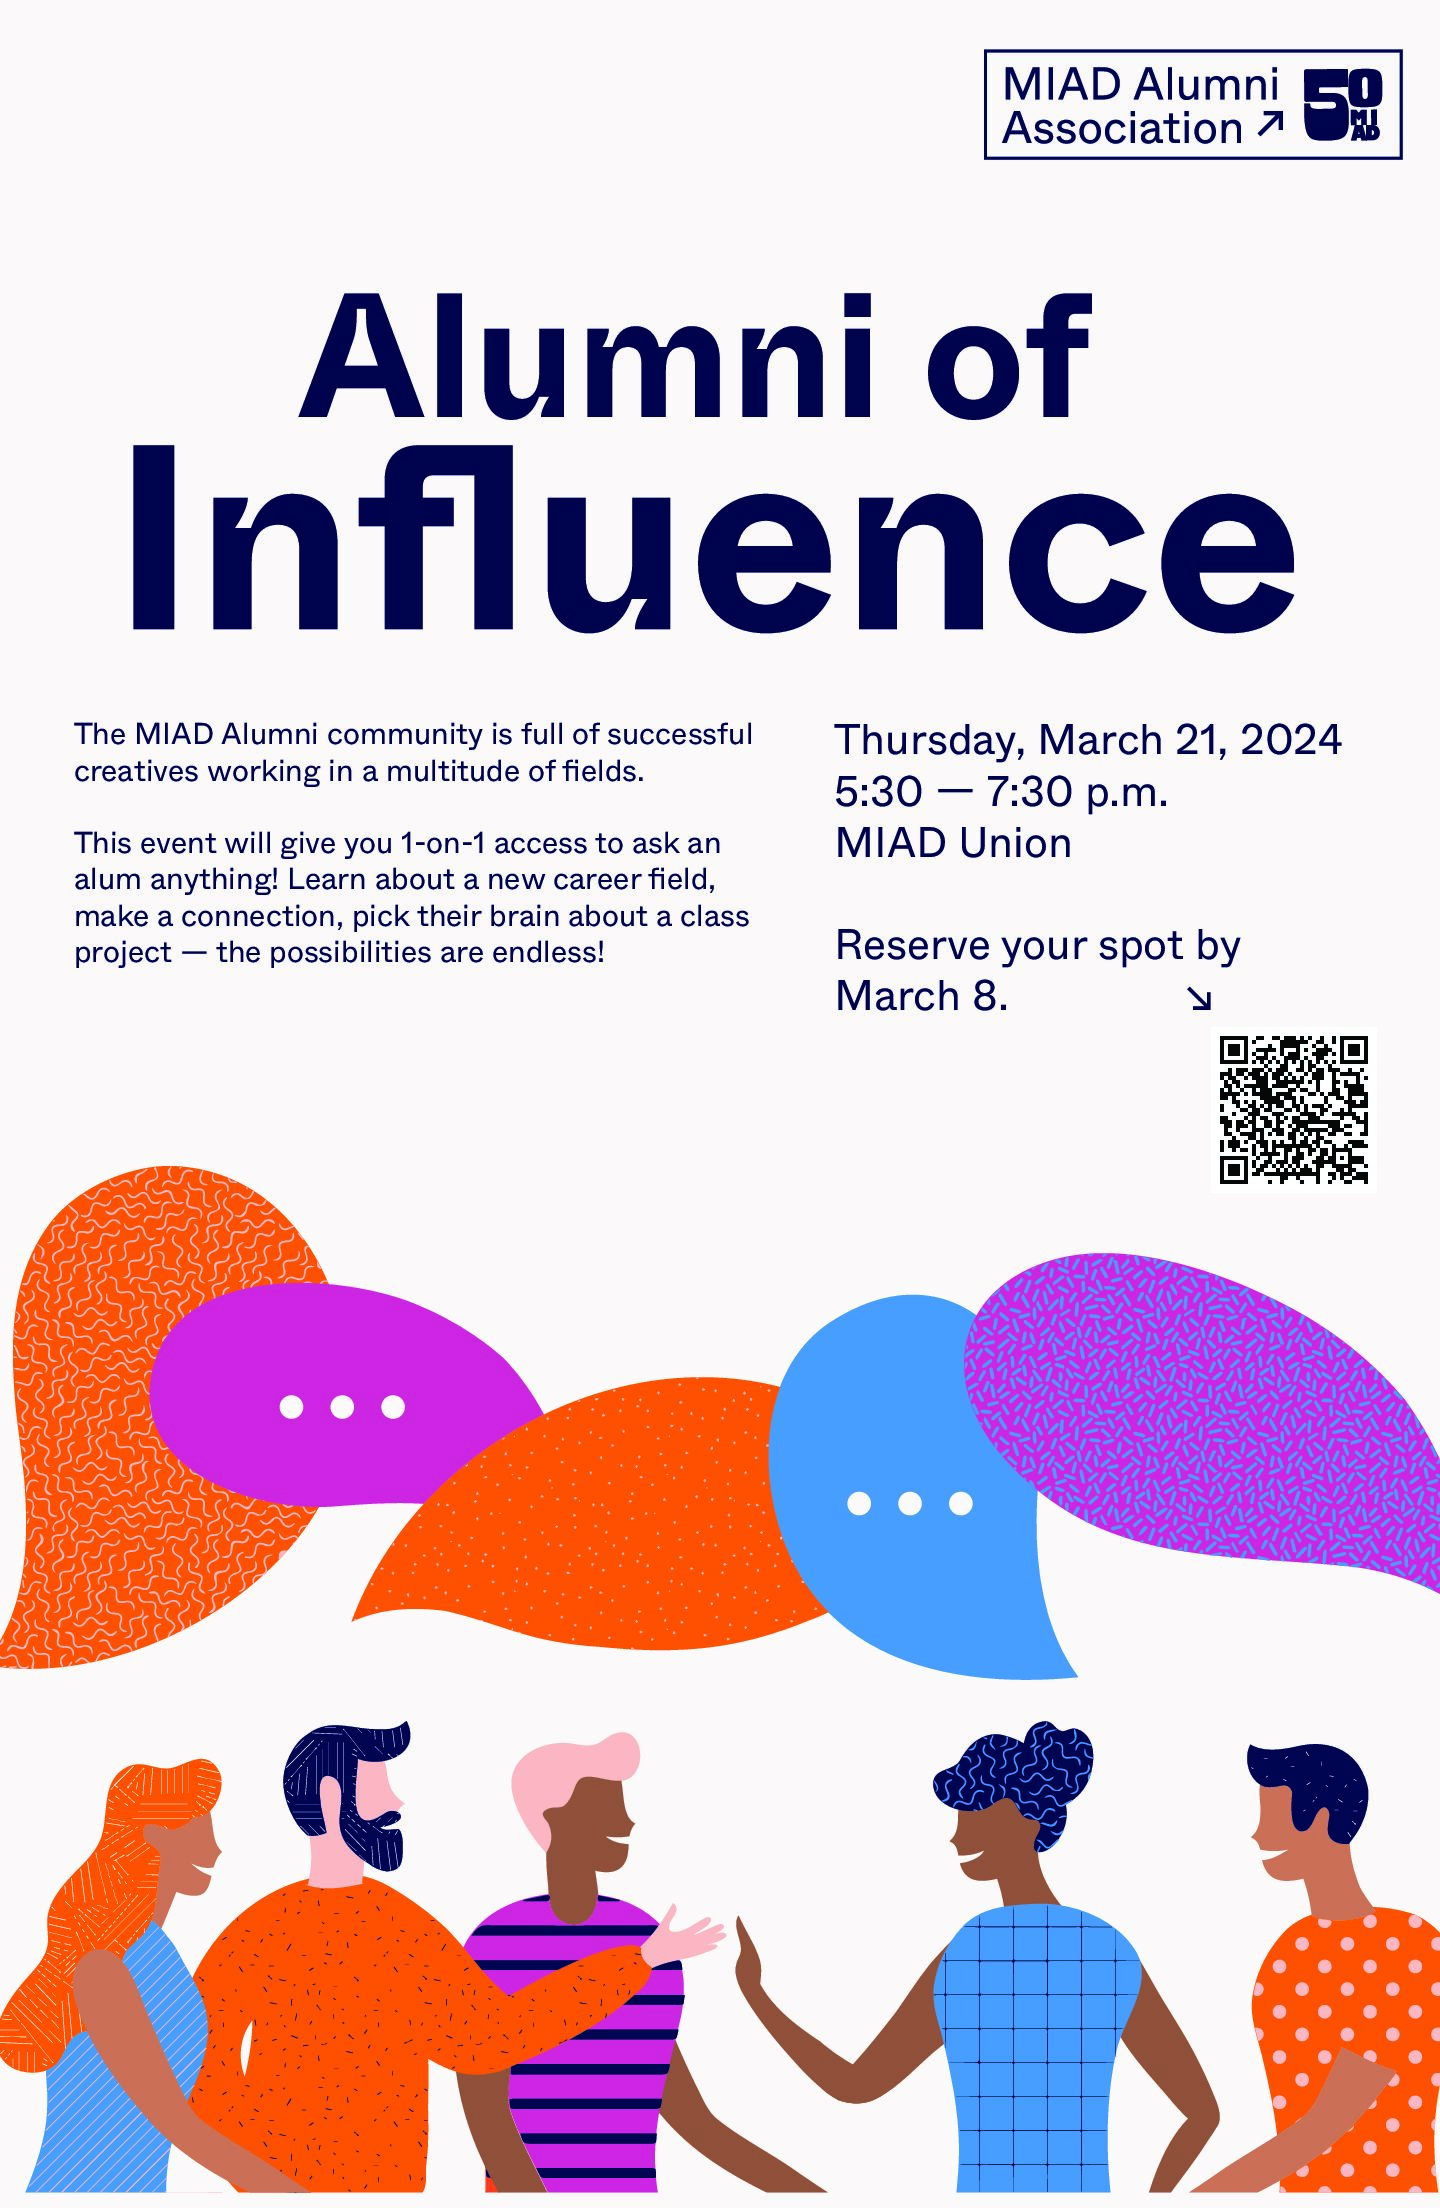 Alumni of Influence, March 21